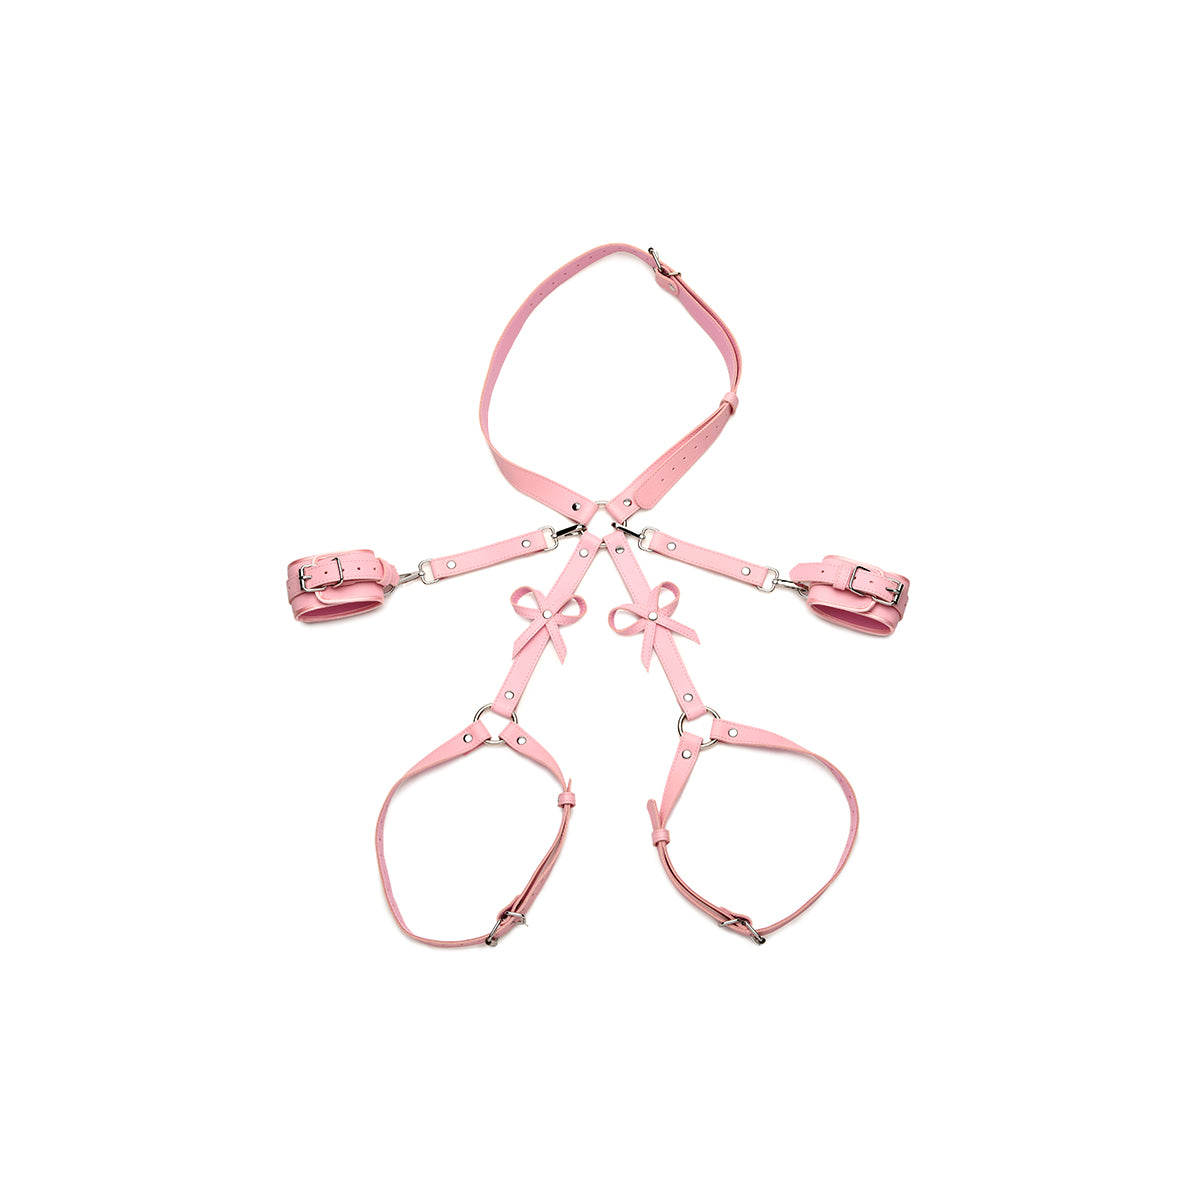 Bondage Harness with Bows XL/2XL - Pink